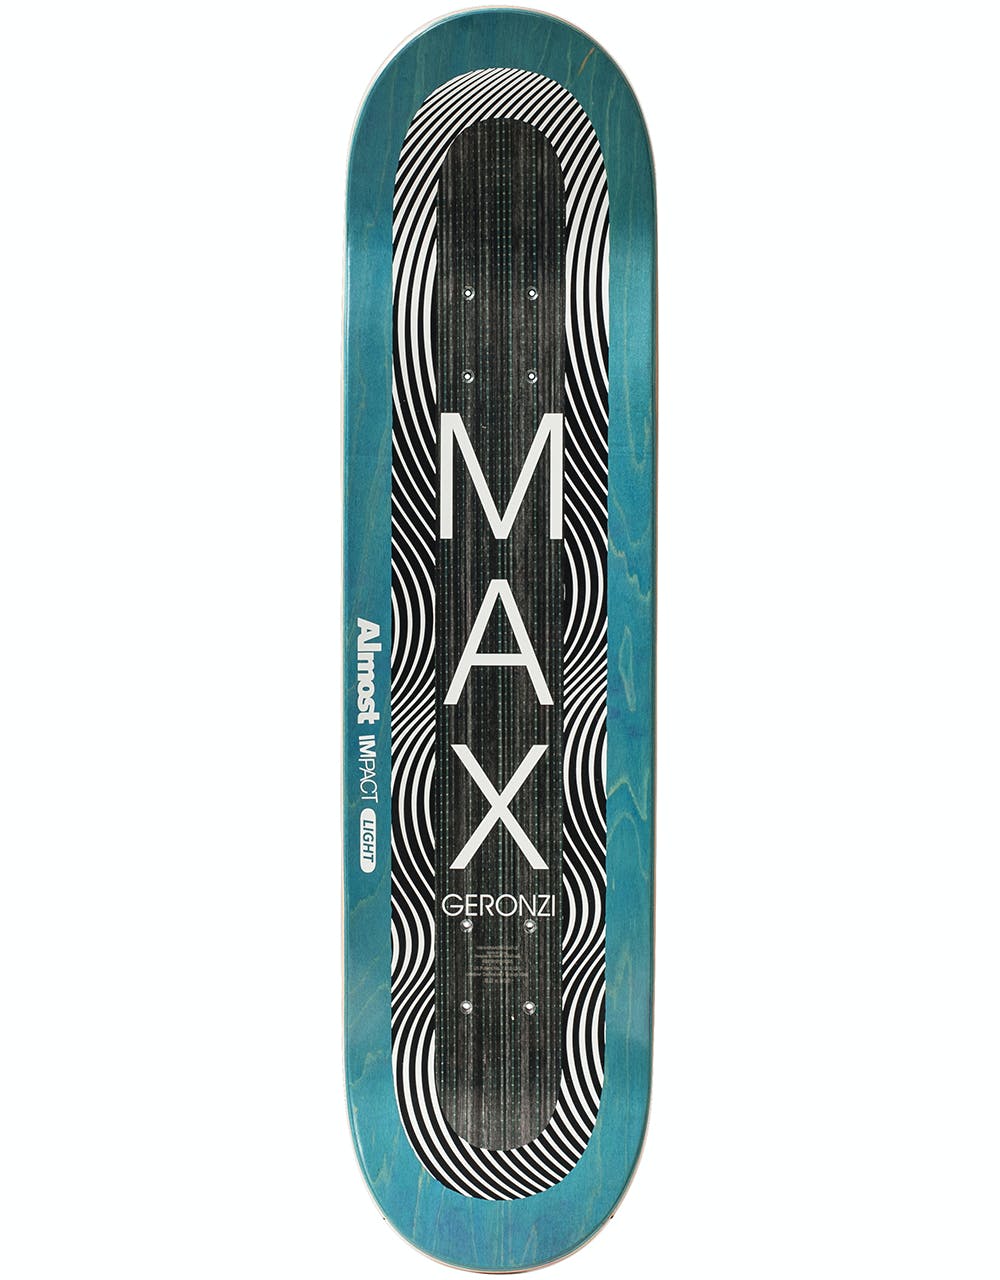 Almost Geronzi Out There Impact Light Skateboard Deck - 8"